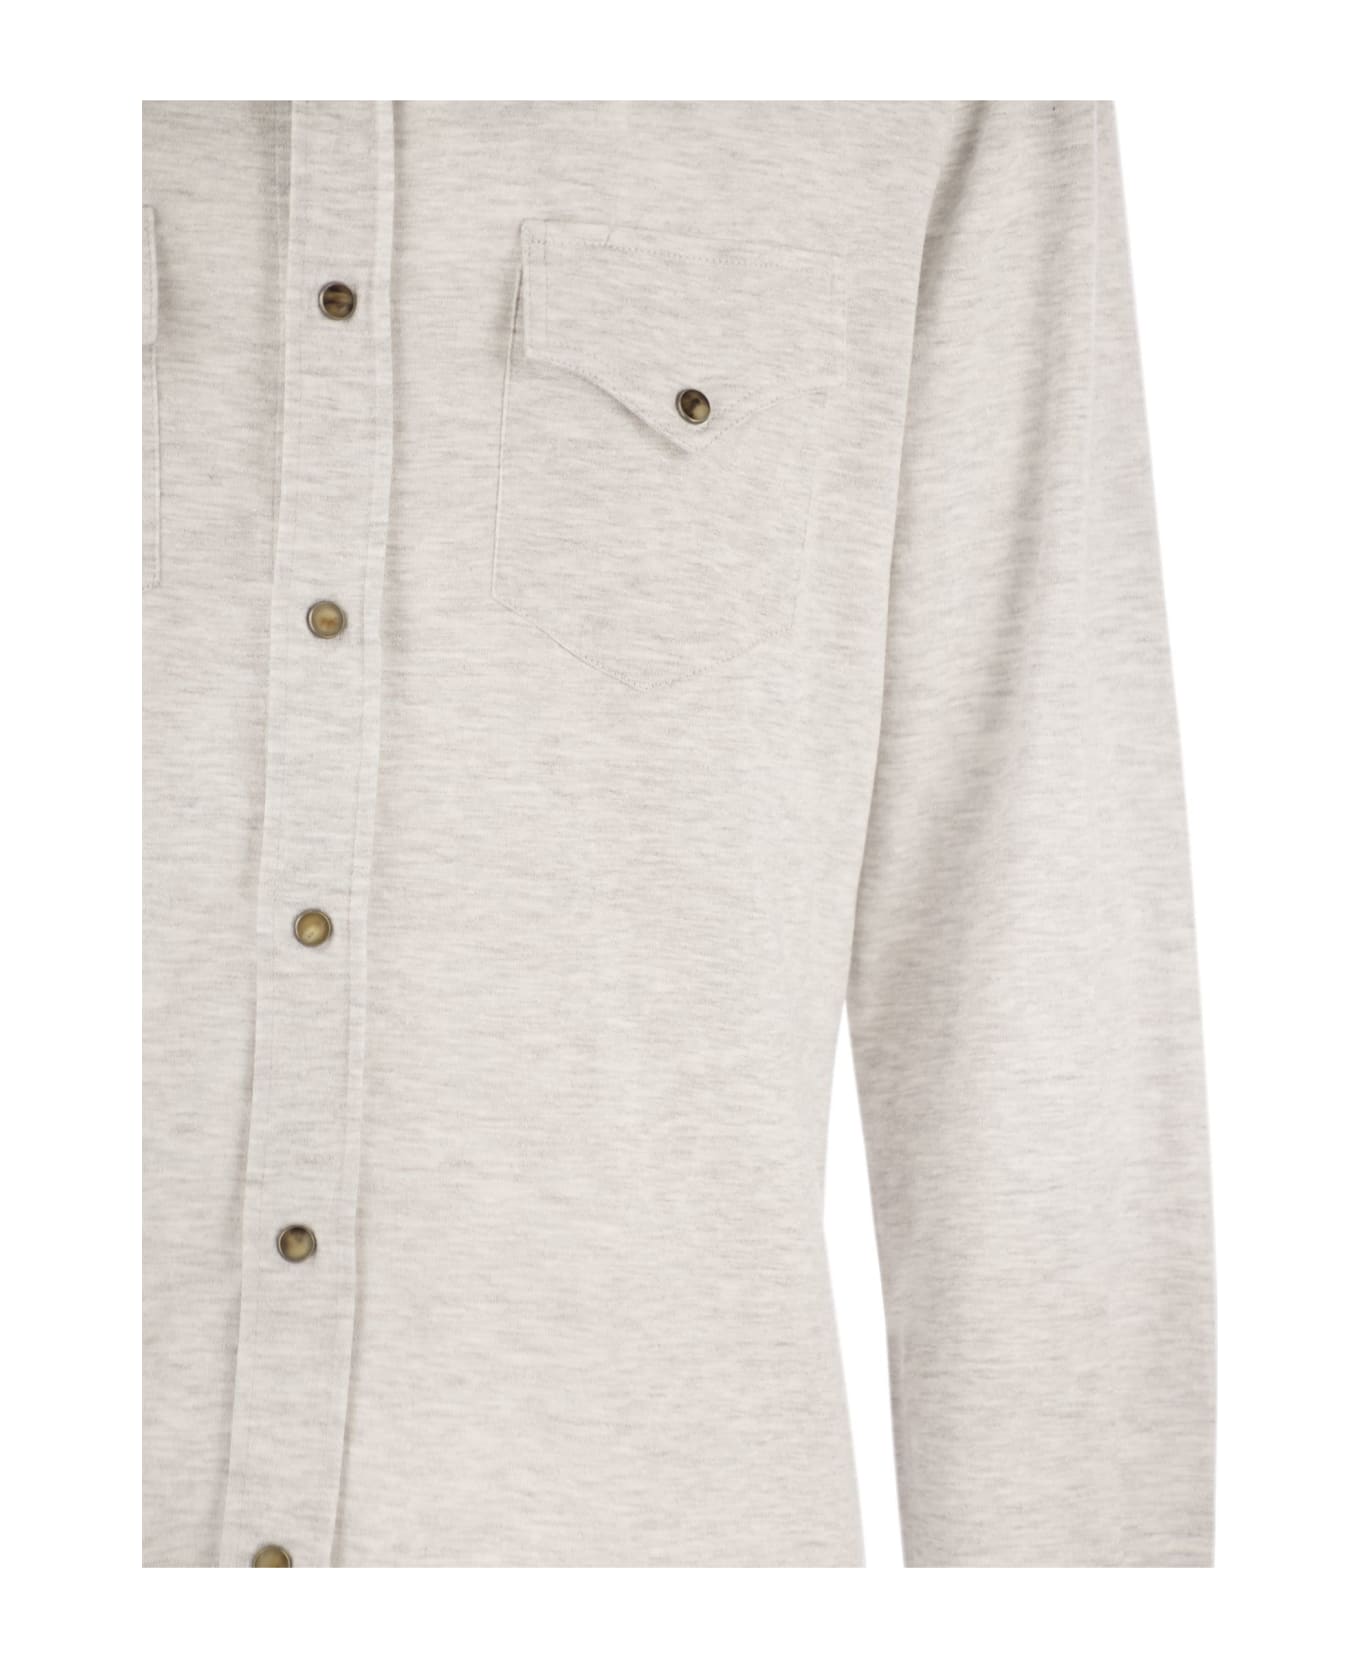 Brunello Cucinelli Linen And Cotton Blend Leisure Fit Shirt With Press Studs And Pockets - Pearl